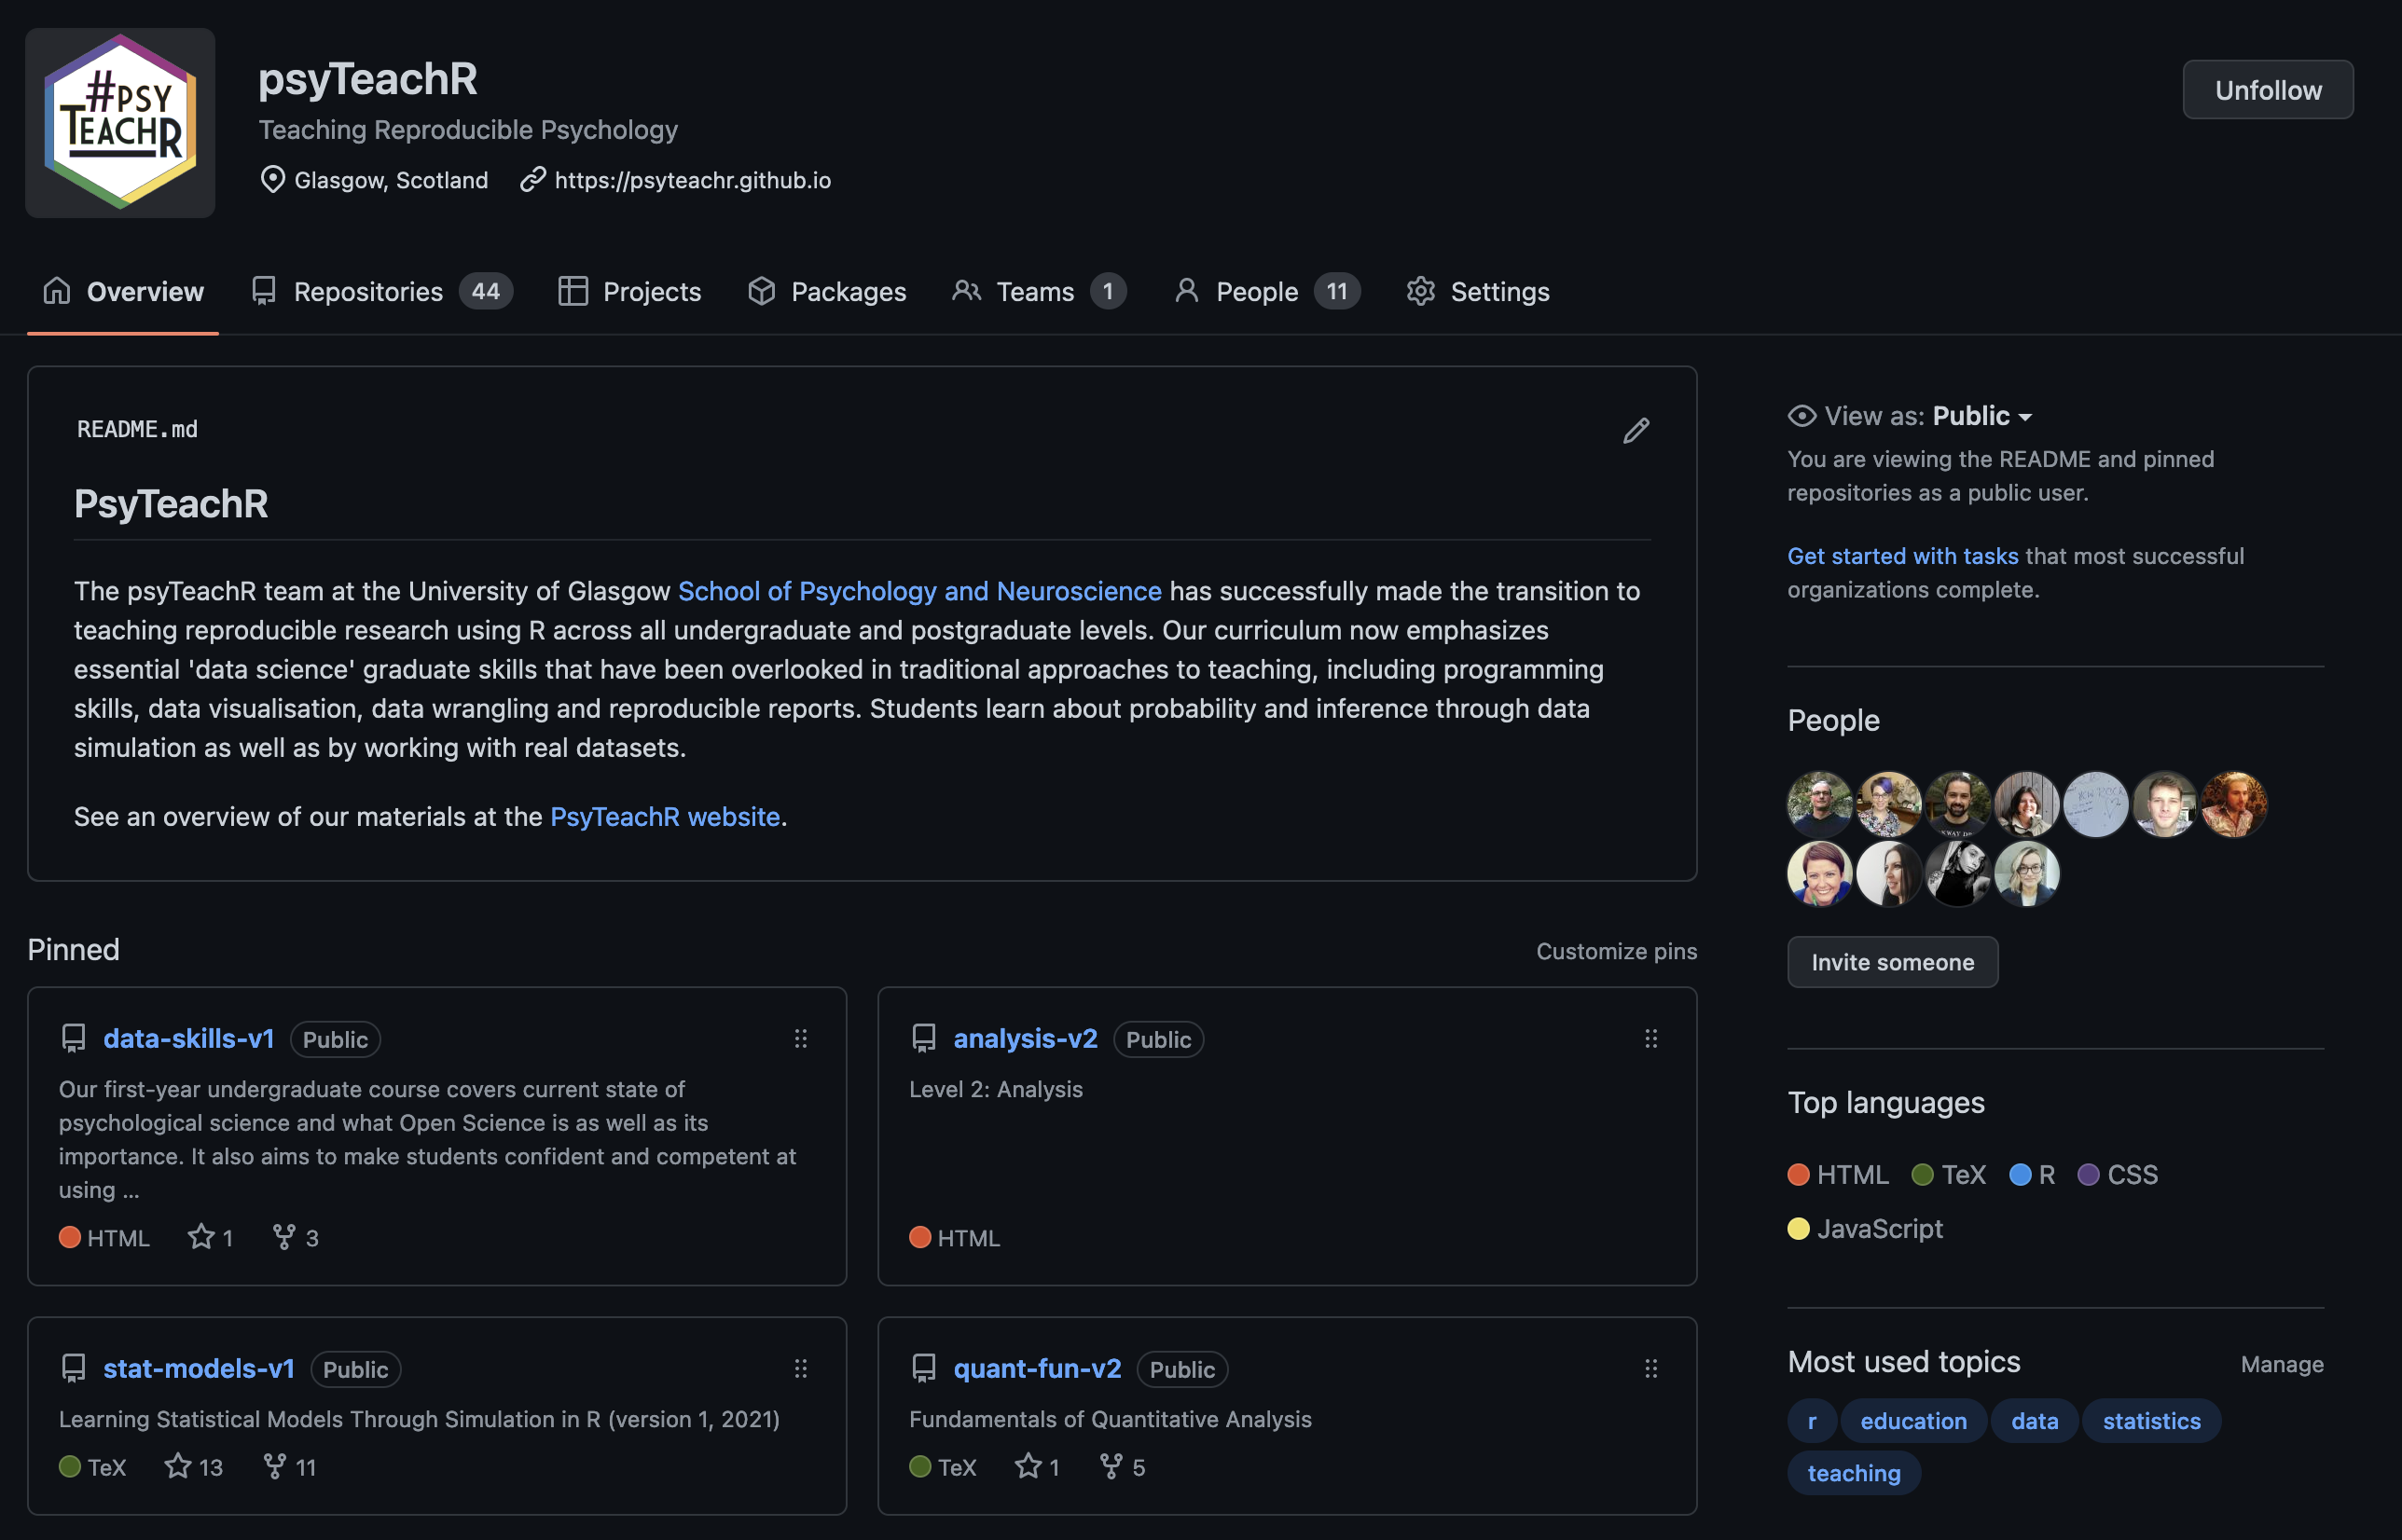 A screenshot of the GitHub interface for the PsyTeachR organisation showing the readme, pinned repositories, and members; see https://github.com/PsyTeachR for full text